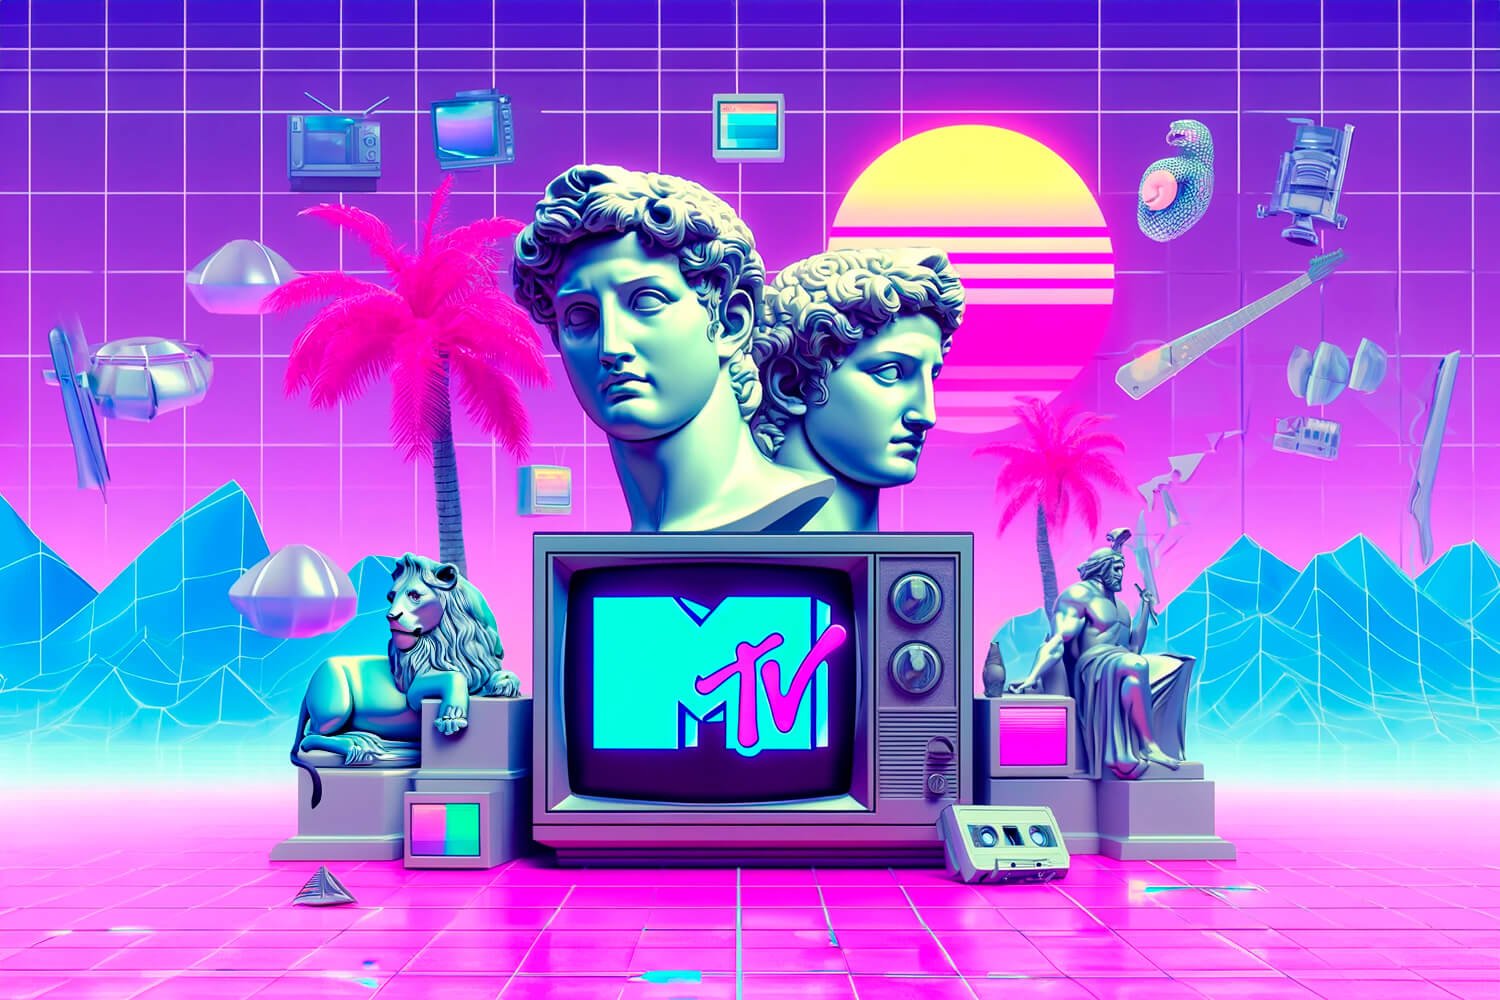 MTV and Vaporwave cultural mashup. This scene blends iconic MTV symbols with classic Vaporwave elements in a dreamy and slightly distorted pastel neon environment.